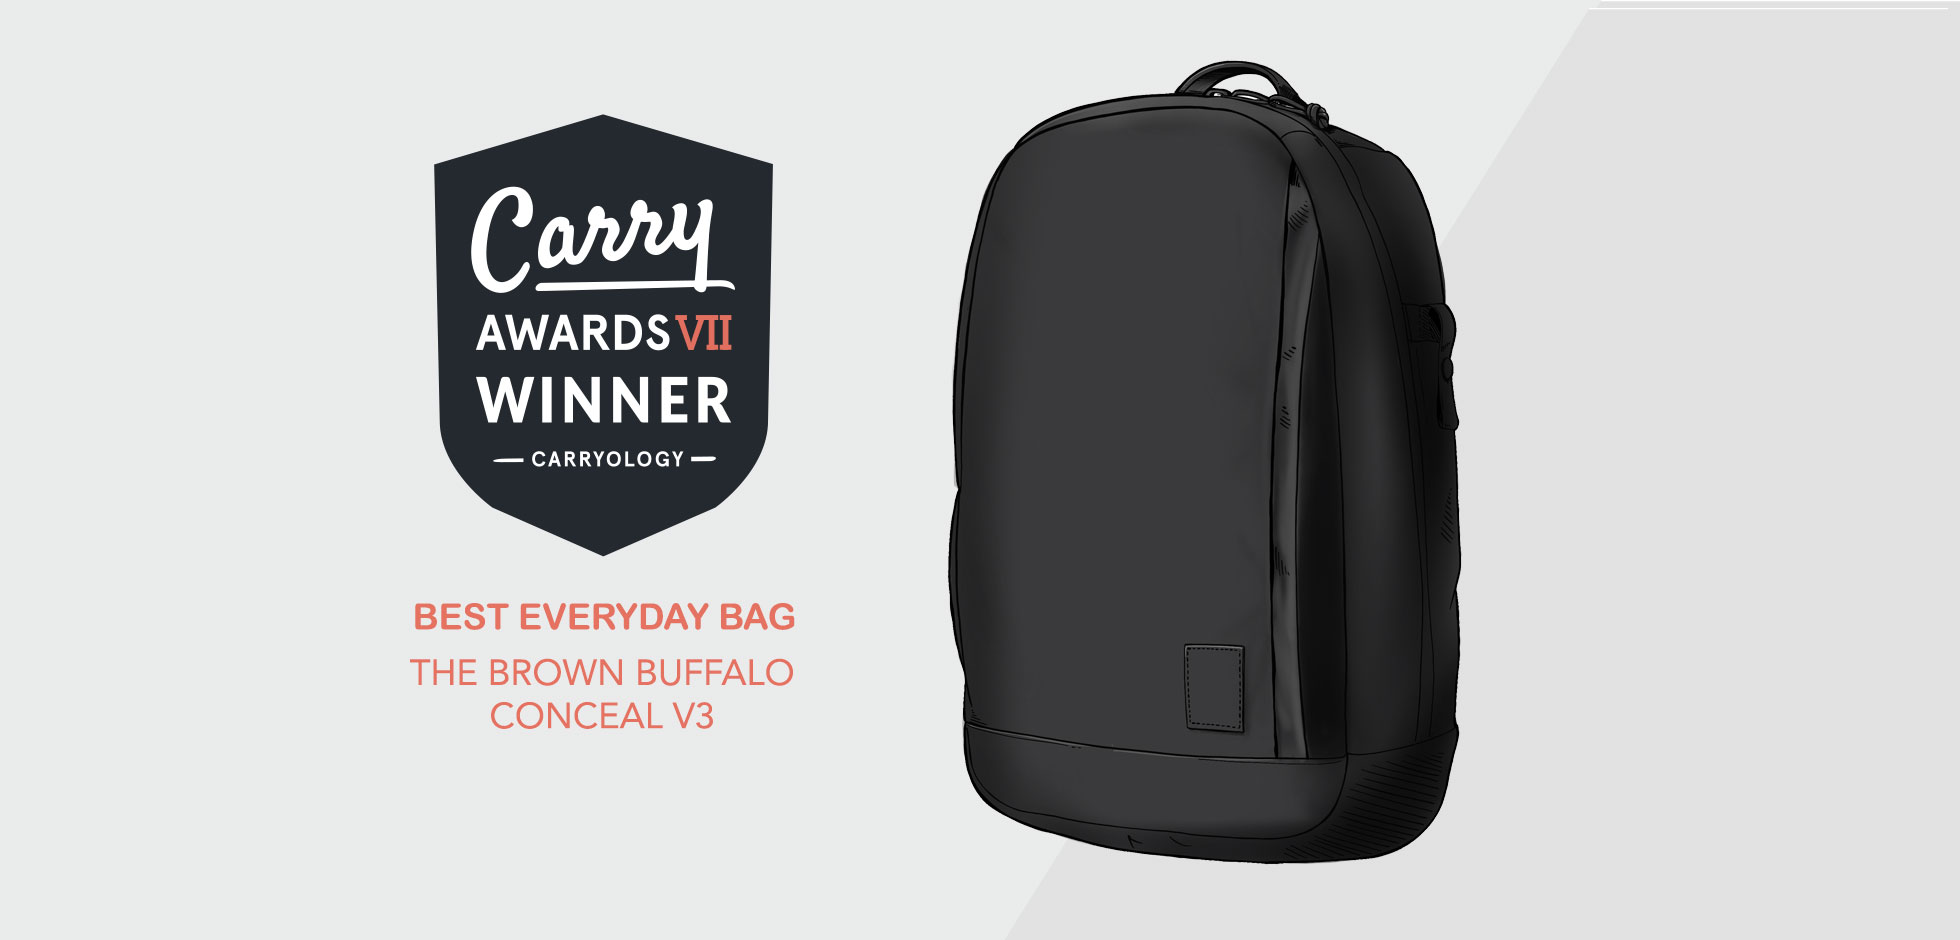 Best Everyday Bag 2019 Carryology Exploring better ways to carry